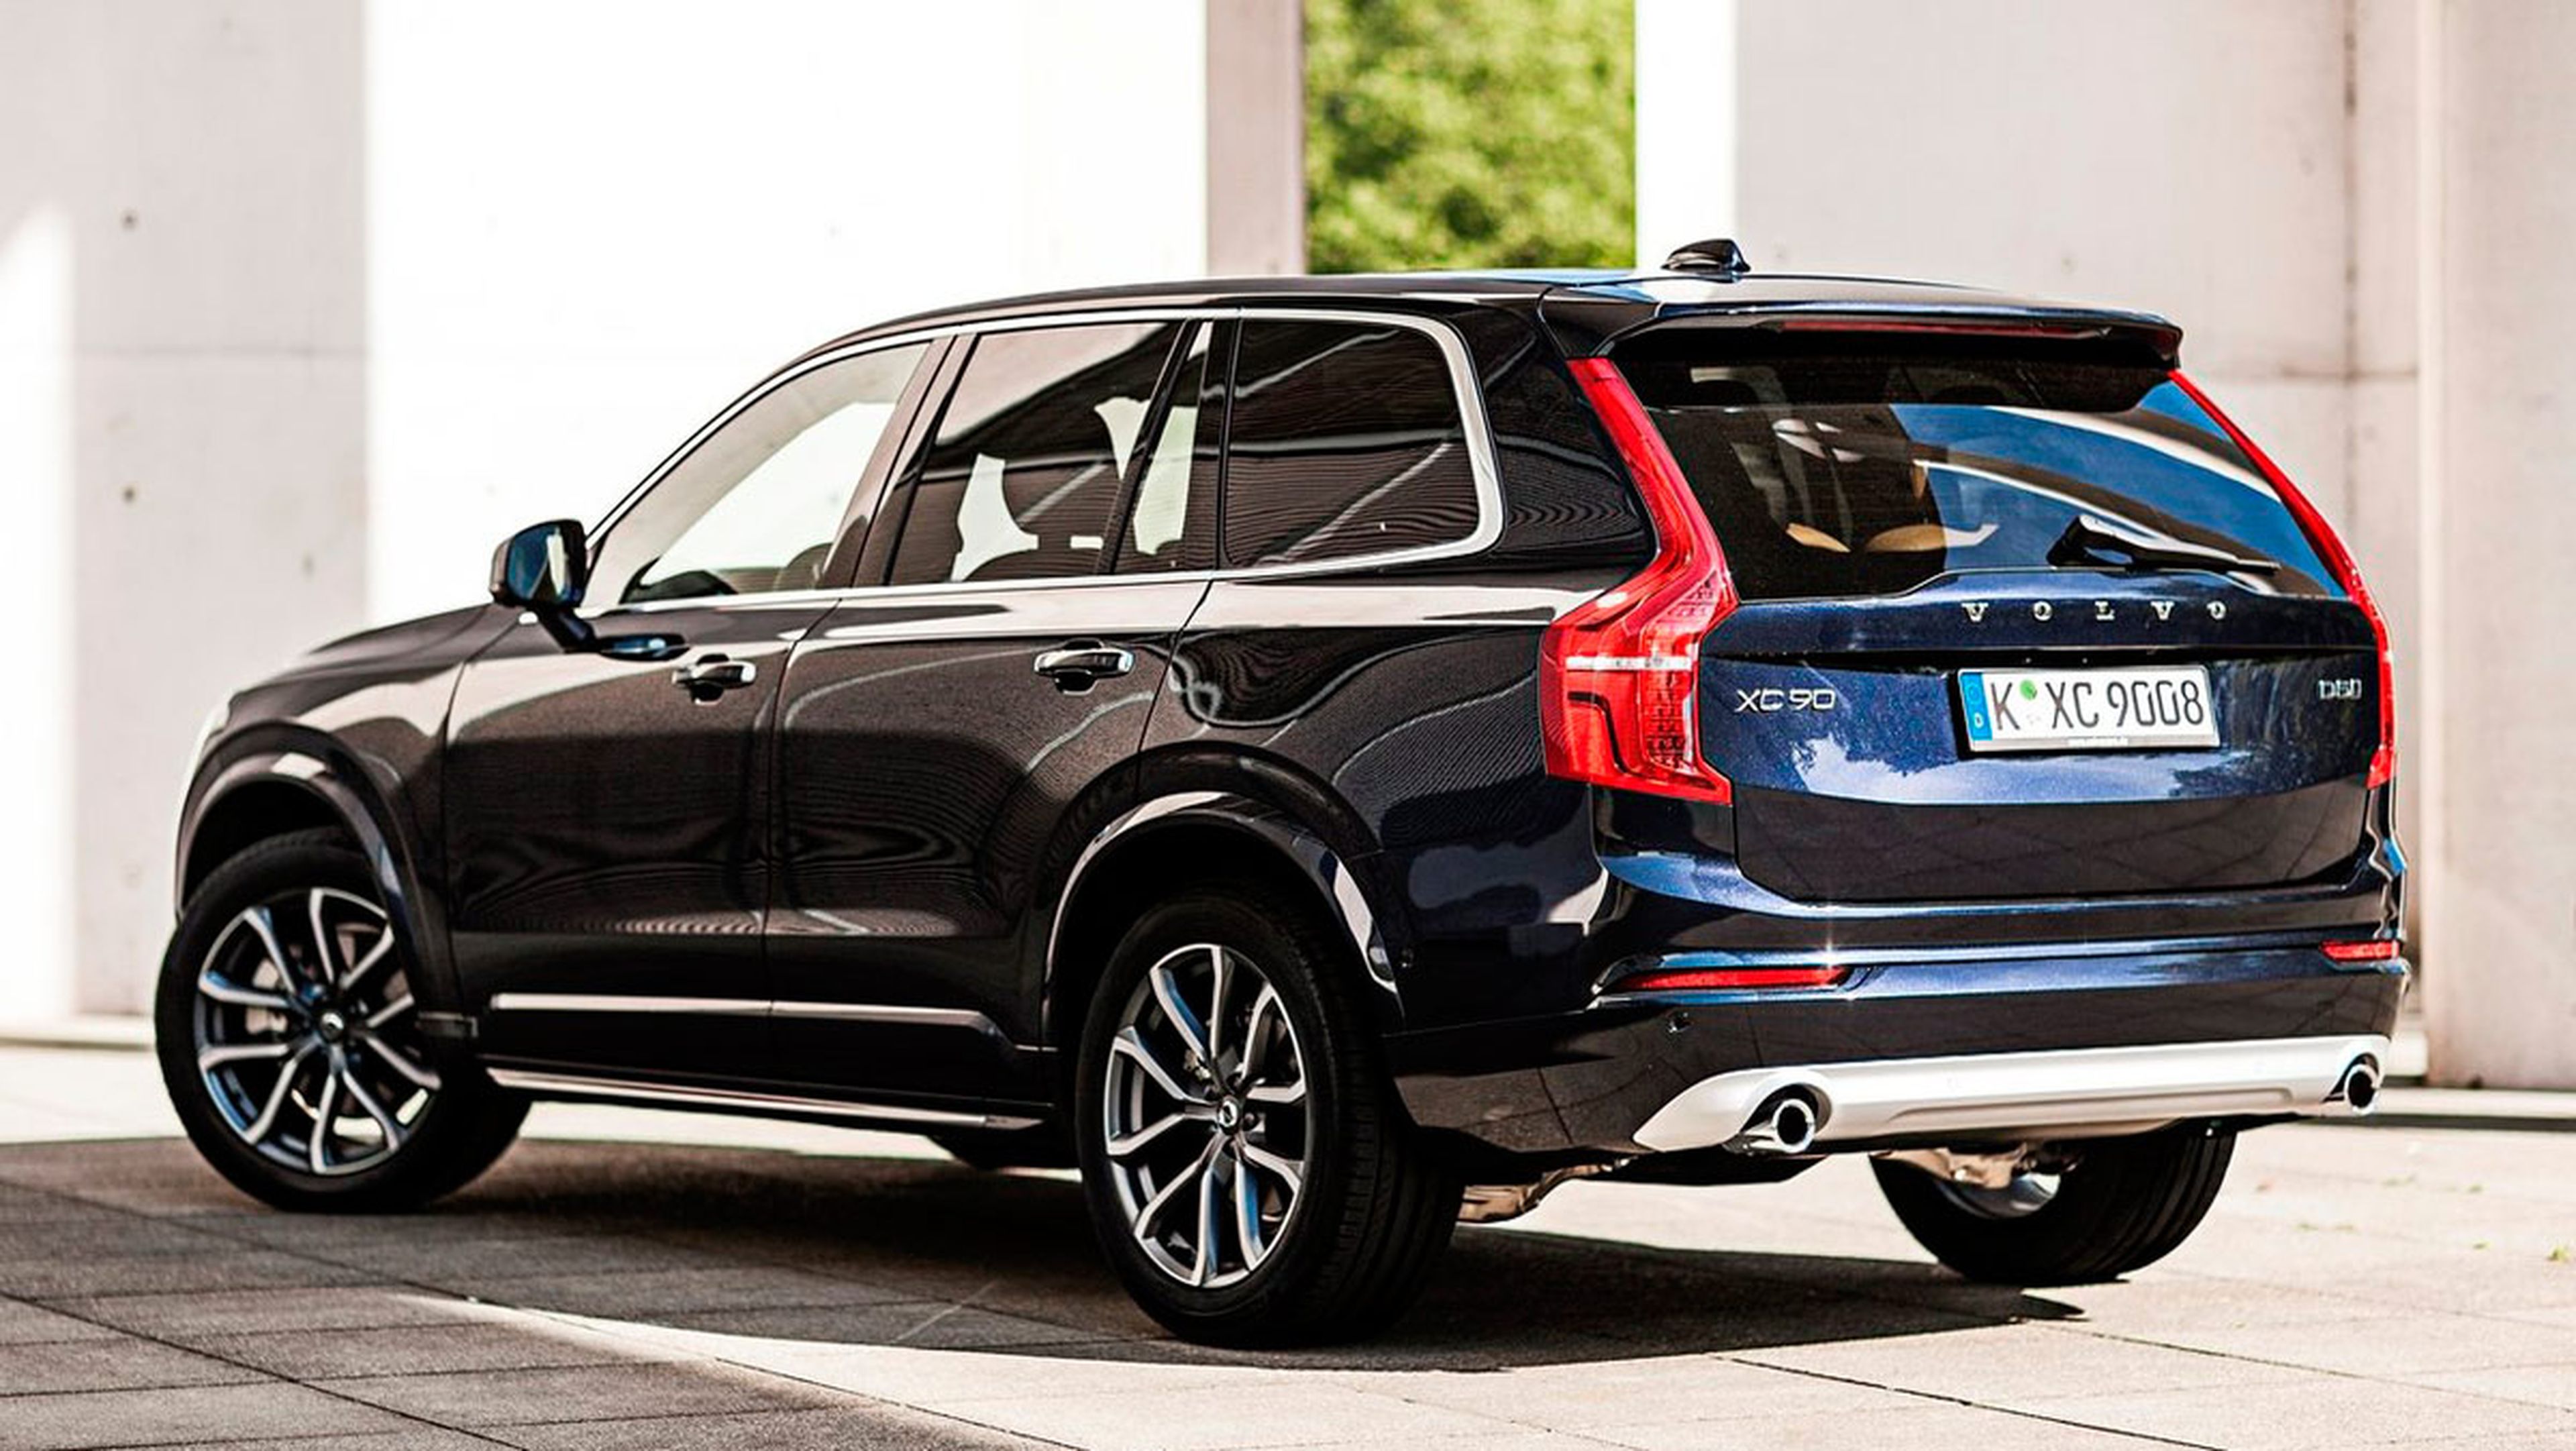 Coches menos fiables: Volvo XC90 (II)